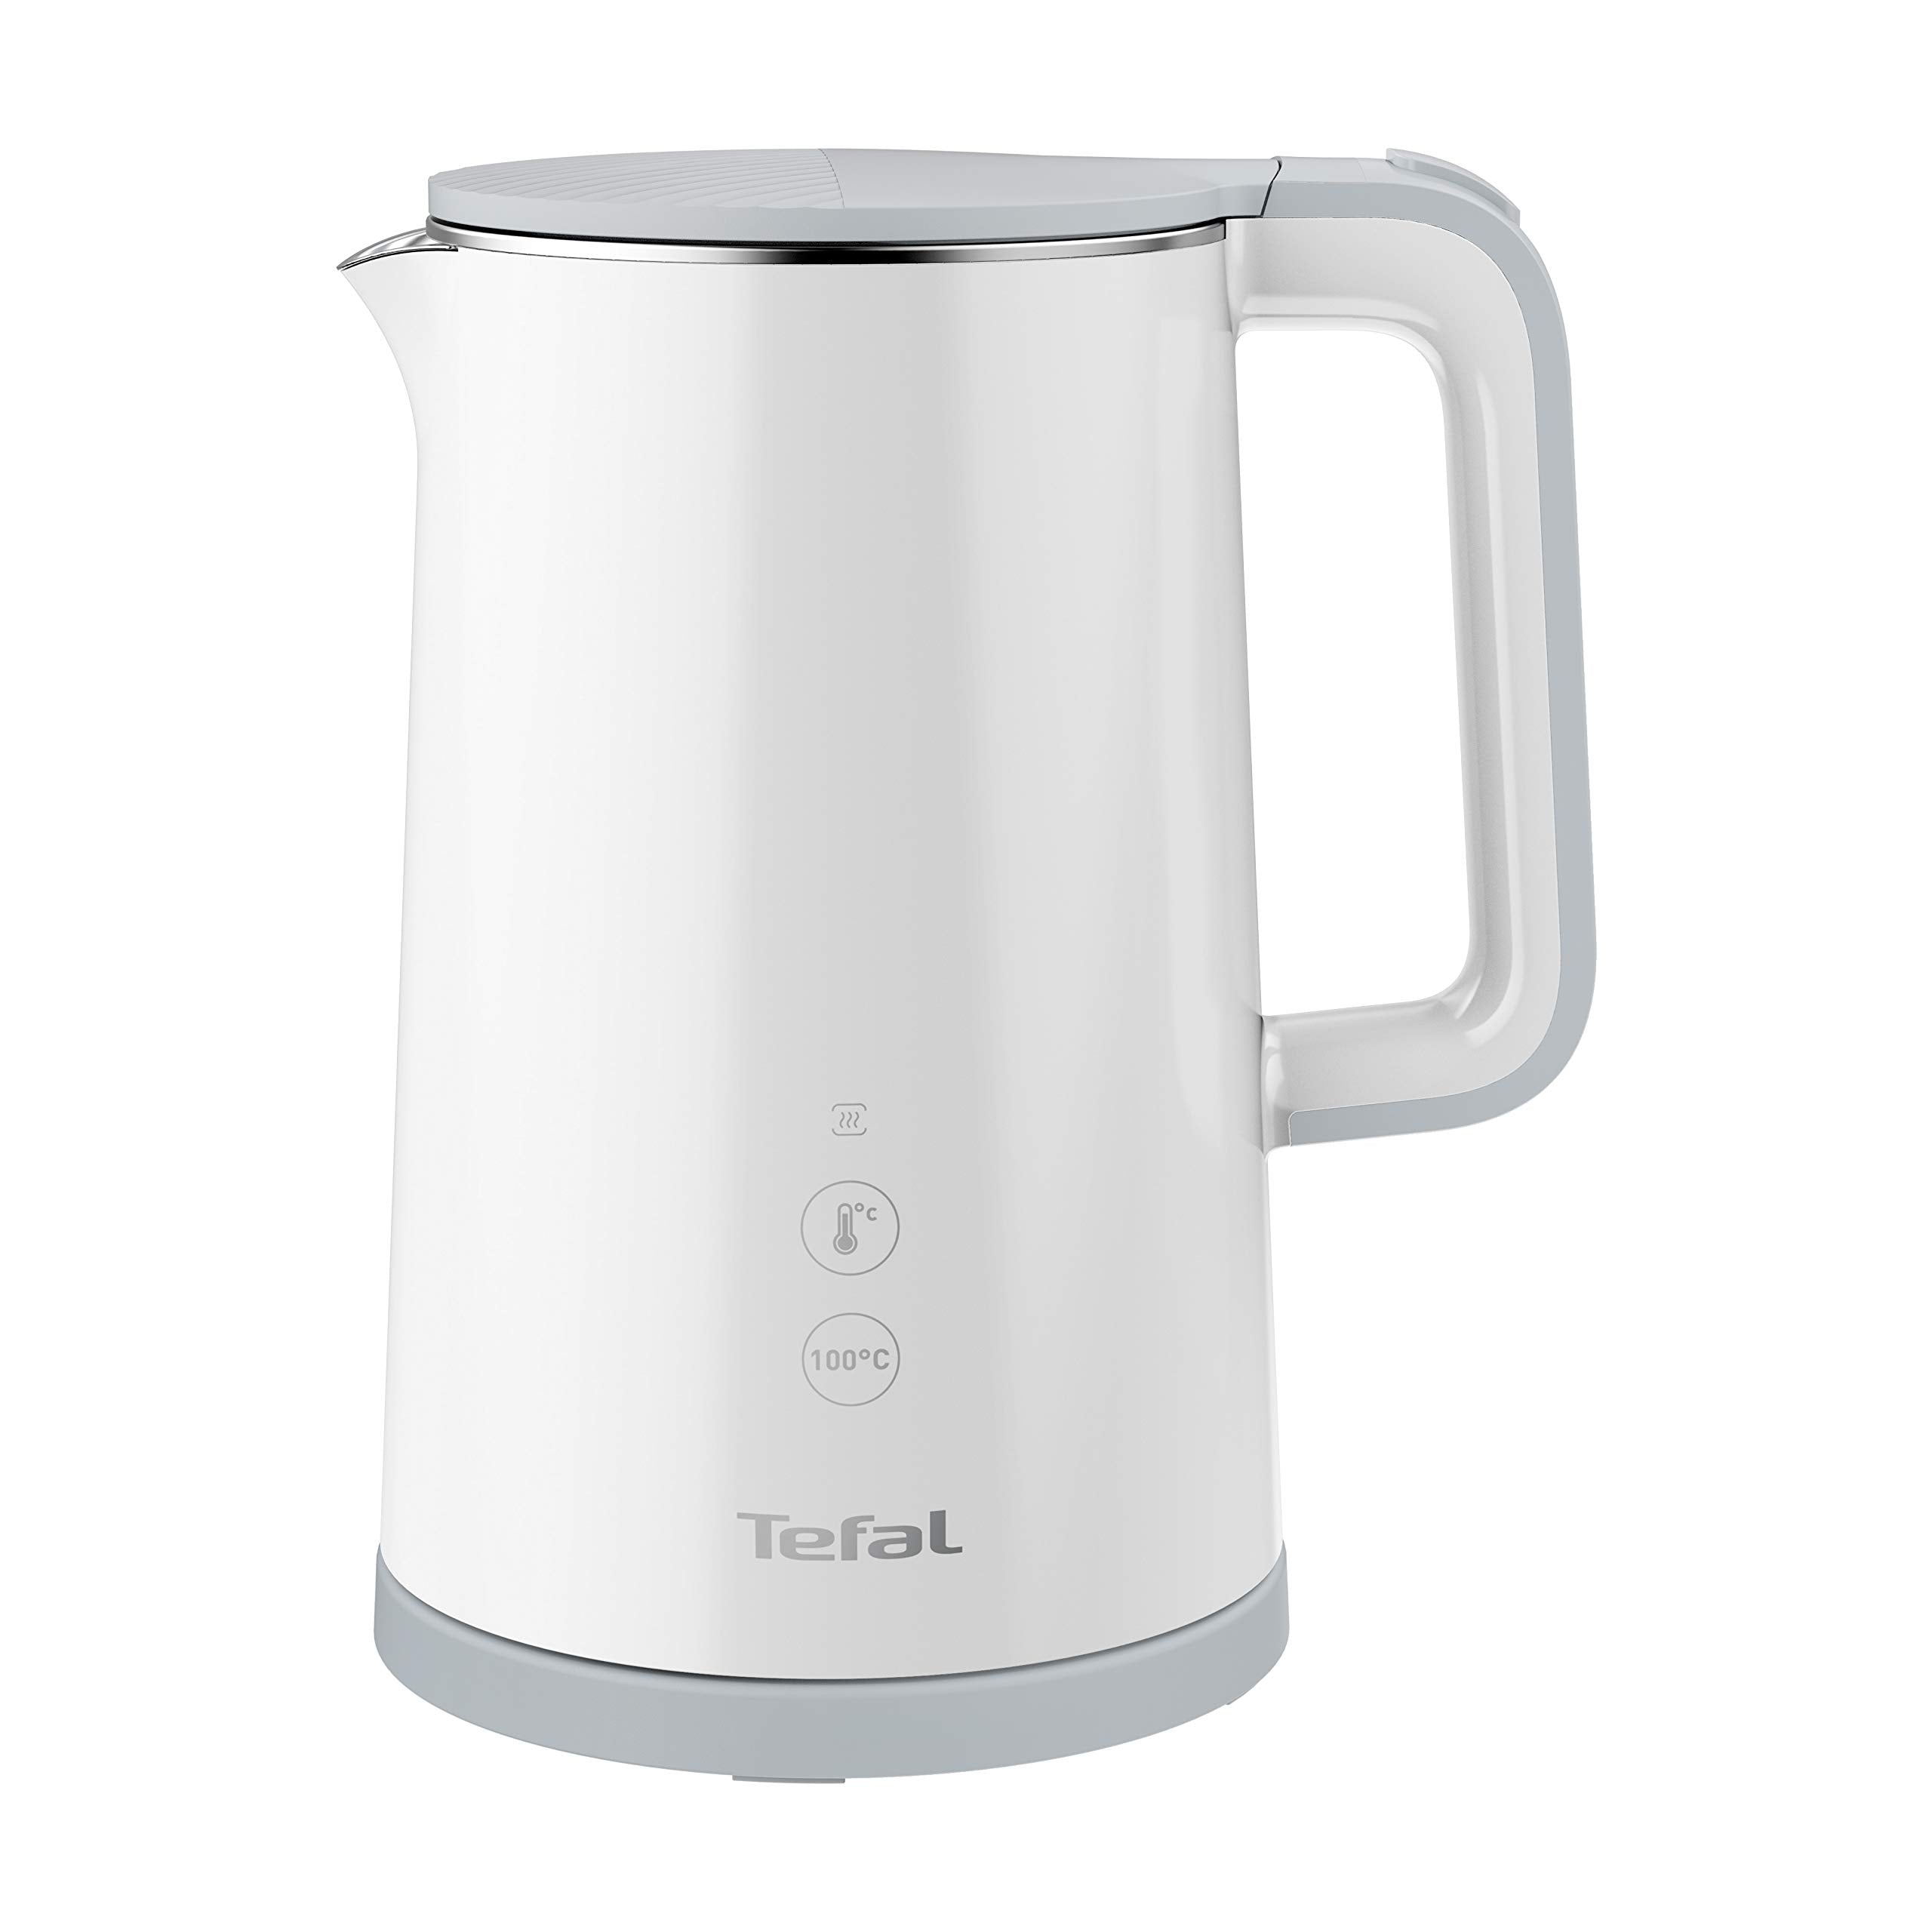 Tefal KO6931 Sense Kettle 1.5 Litre Capacity, Digital Display, 5 Temperature Levels, 360 ° Base, Water Level Indicator, Removable Limescale Filter, 30 Minute Keep Warm Function, White